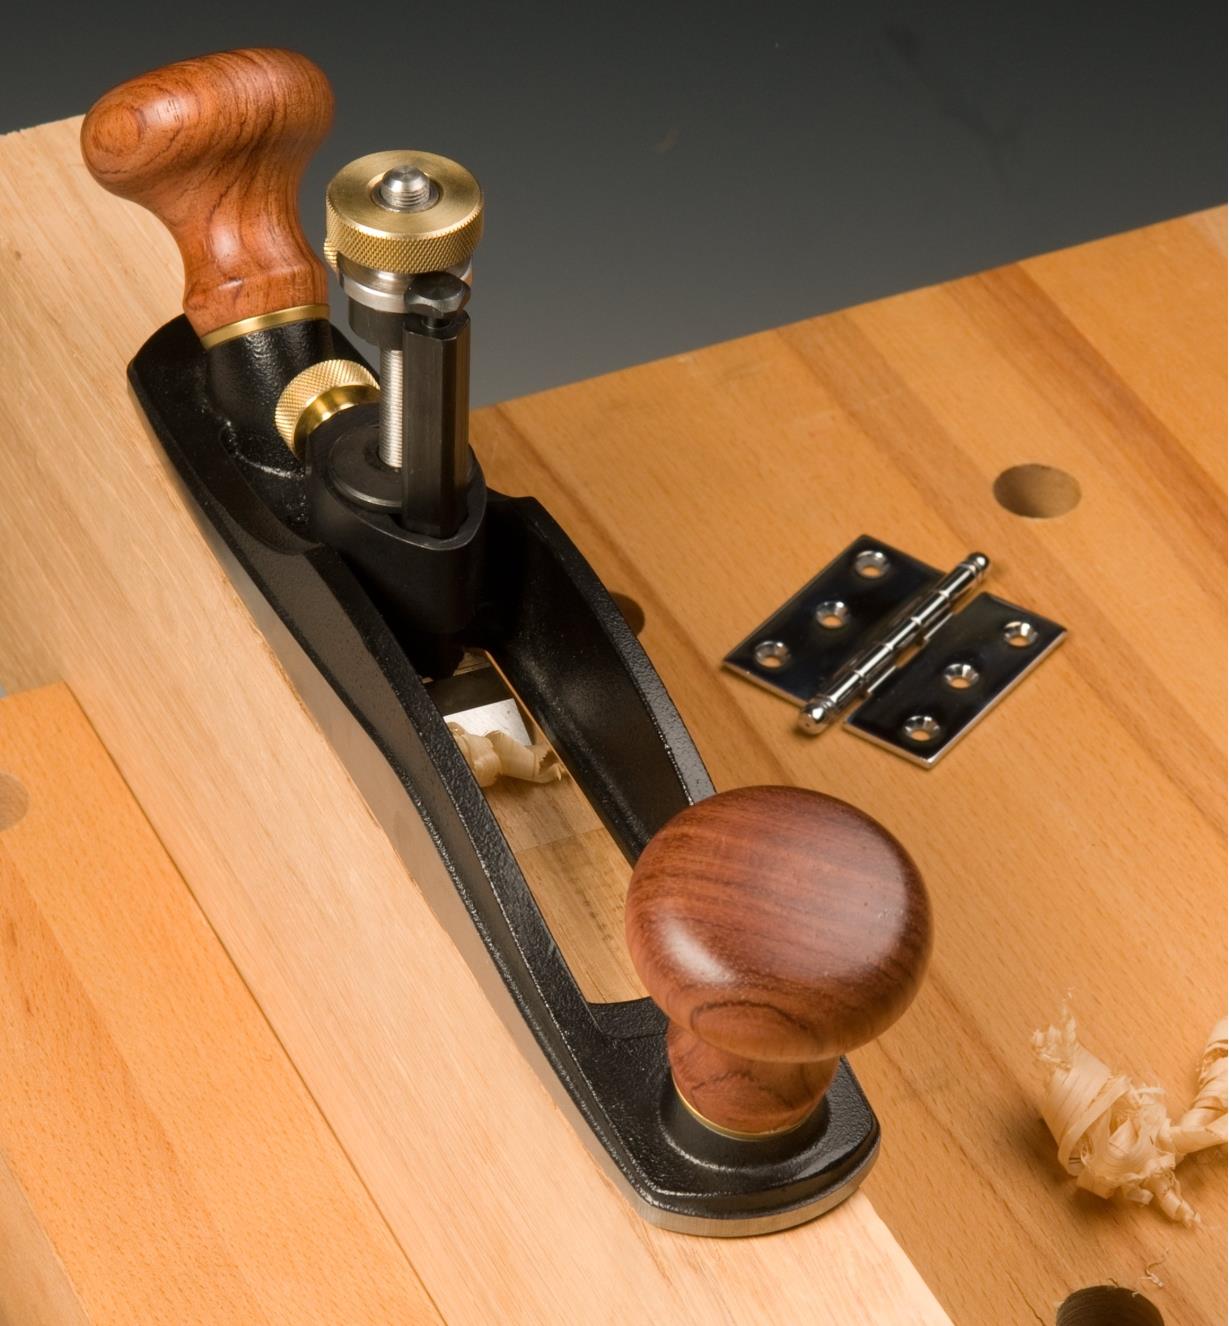 Routing a hinge mortise in a door with a Hinge Mortise Plane